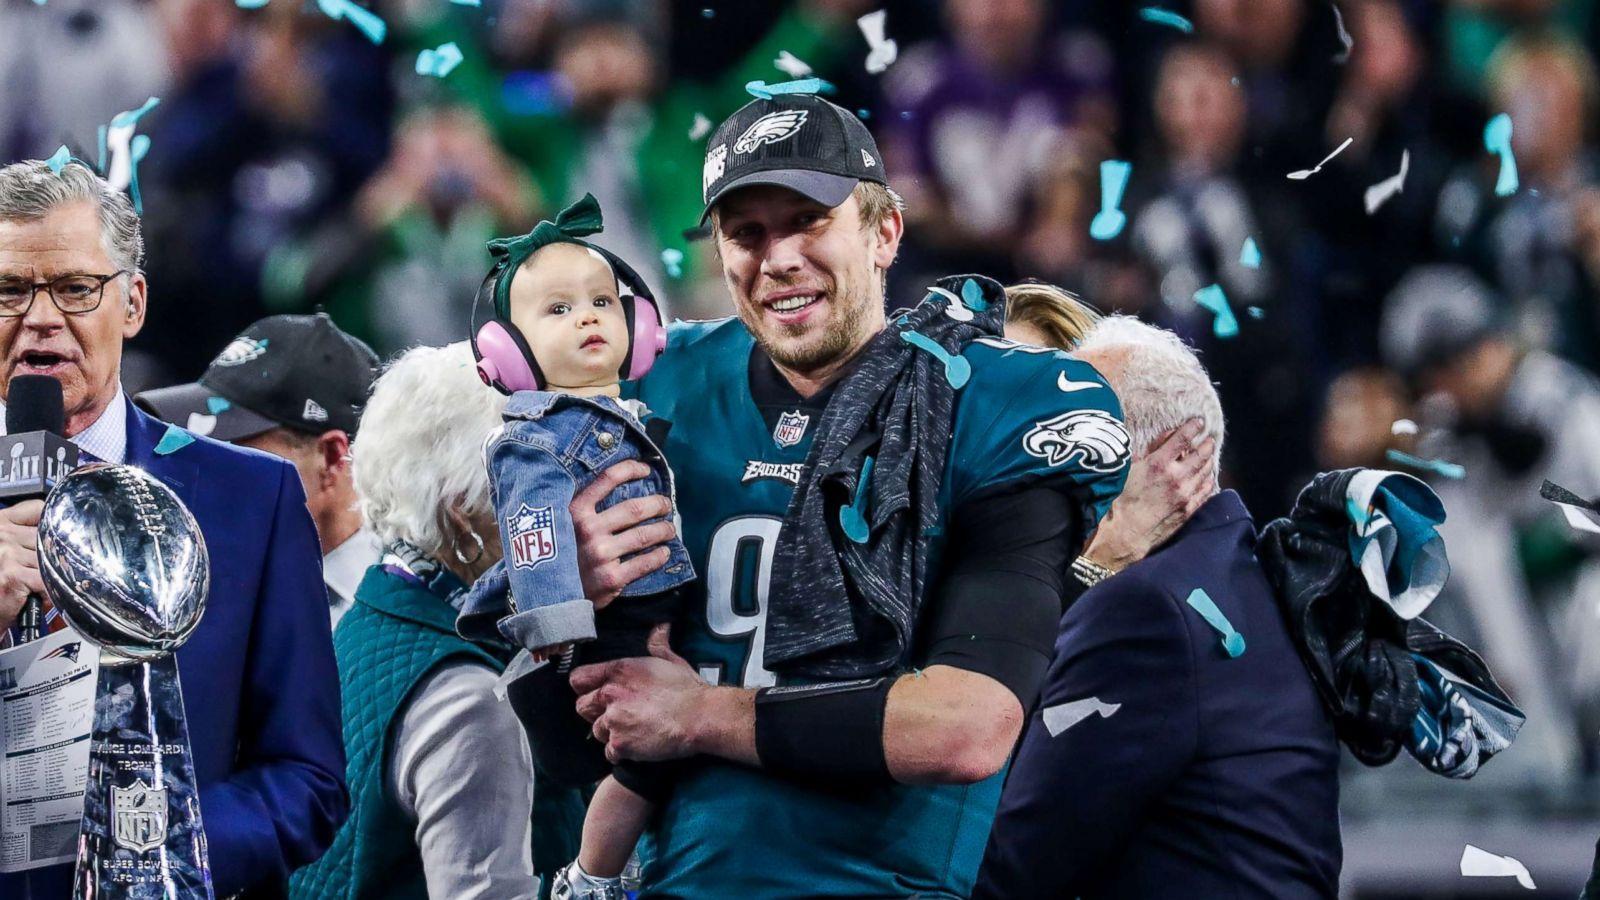 facts about the Eagles Super Bowl hero and MVP Nick Foles